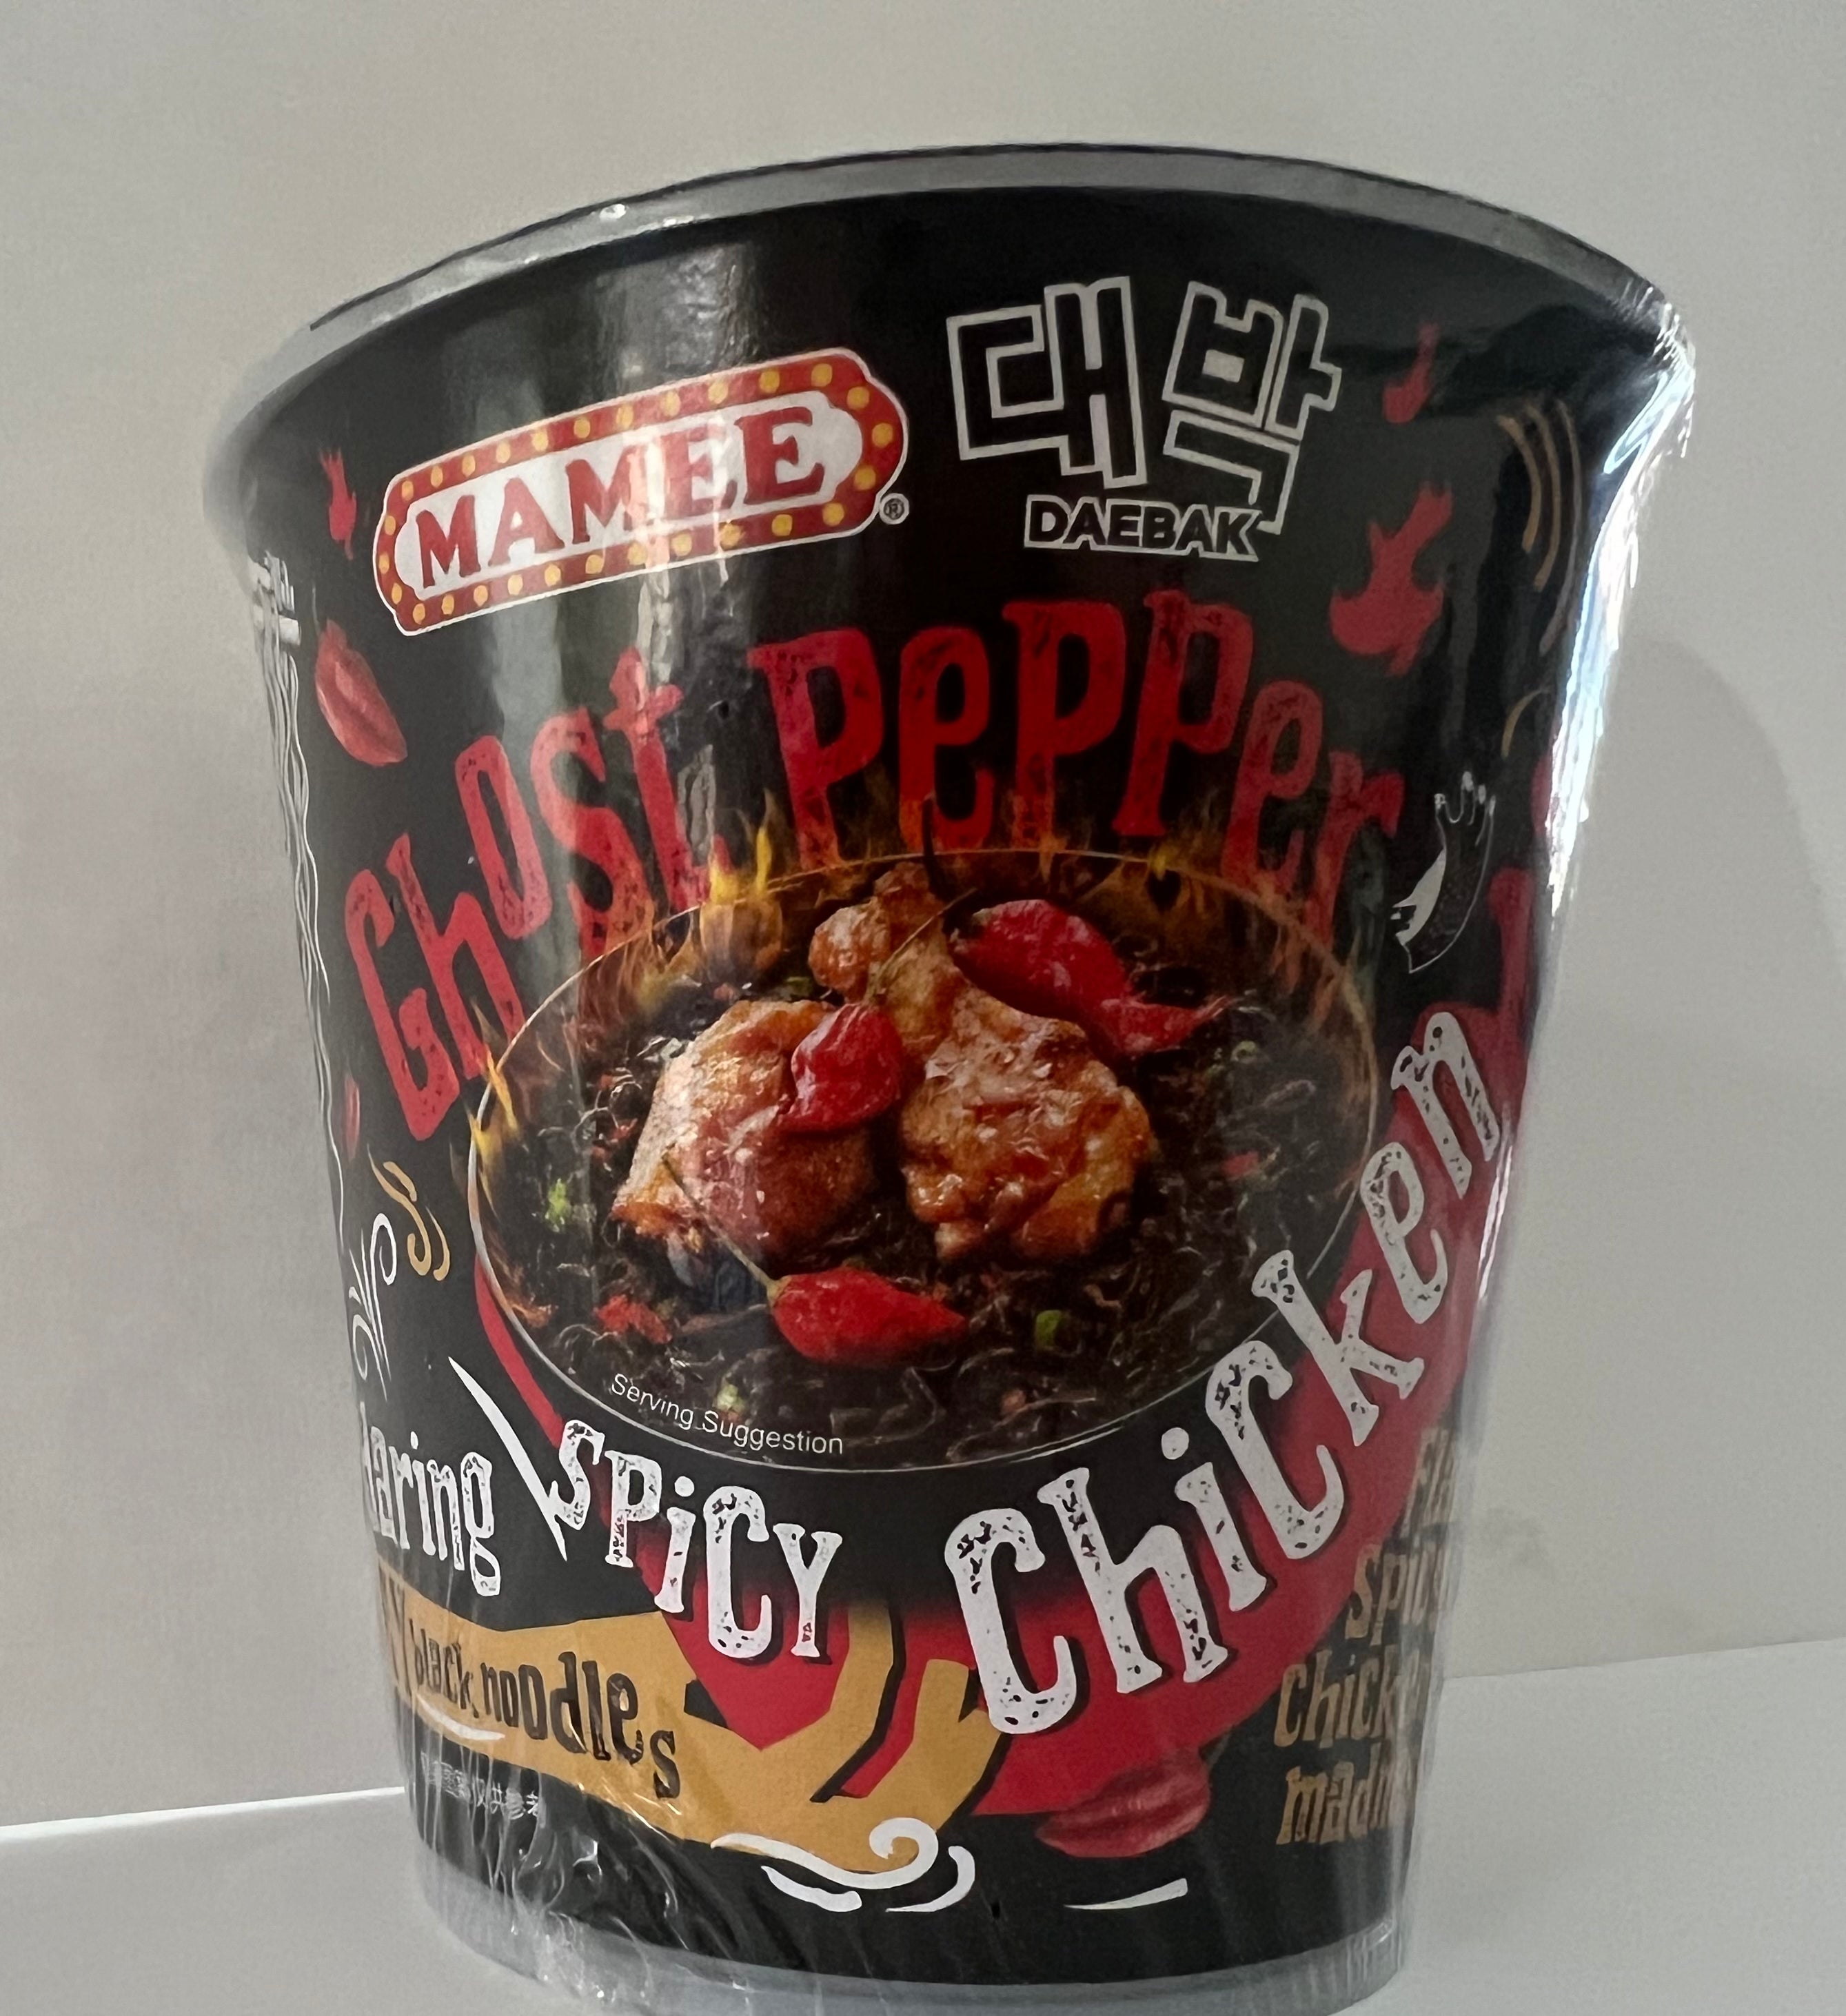 Mamee Ghost pepper spicy chicken noodles